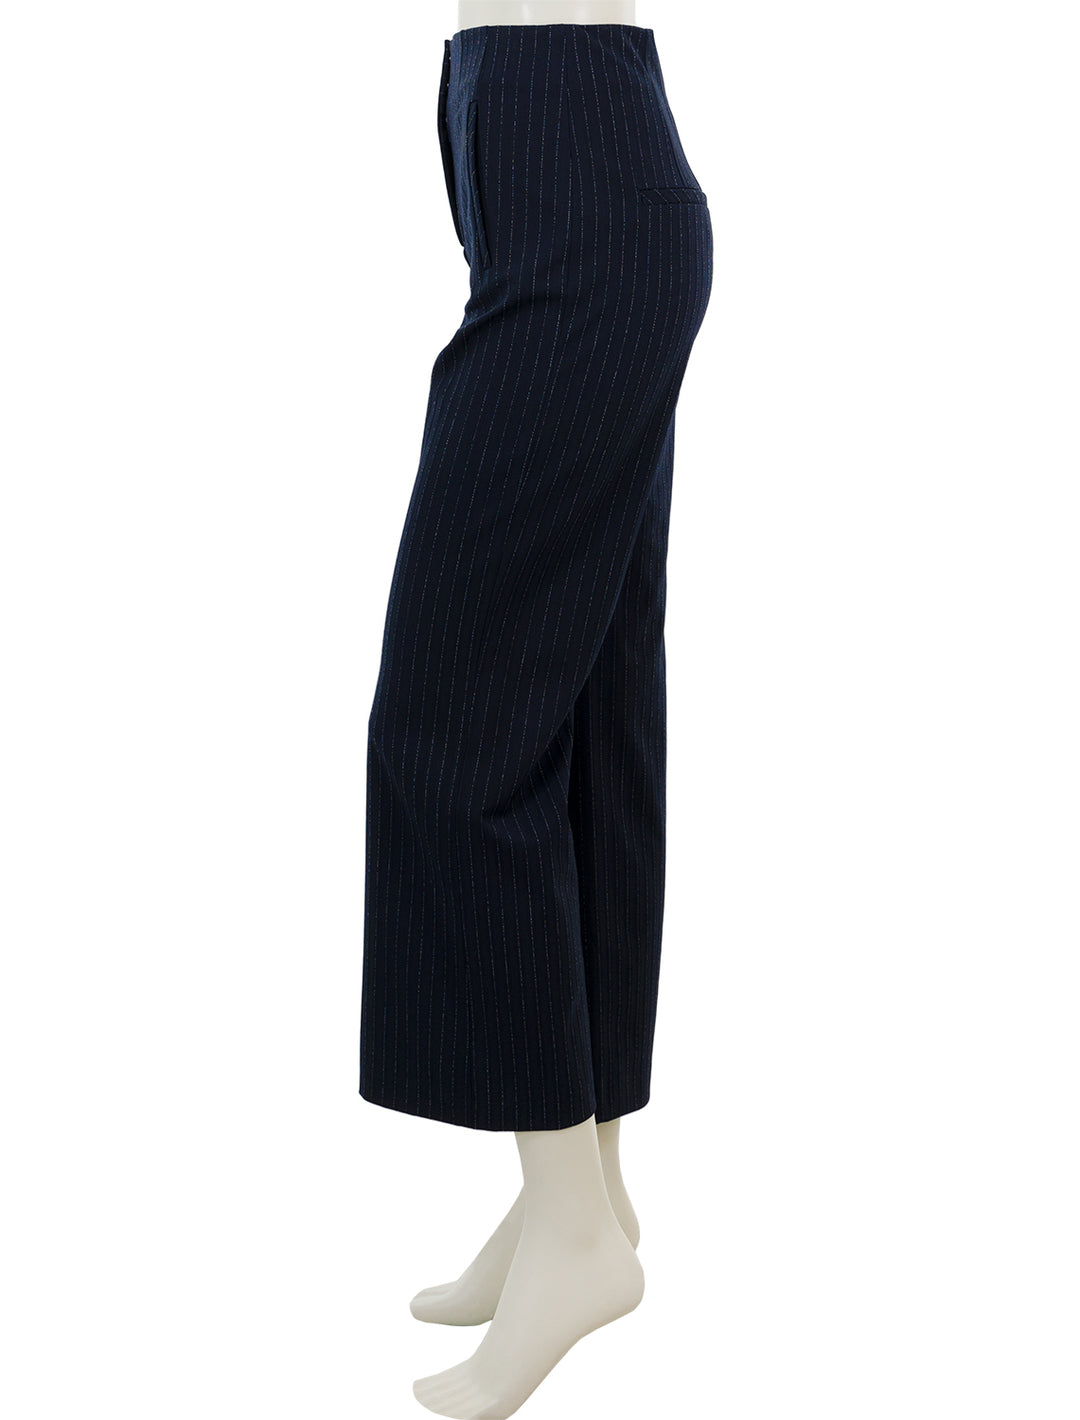 Side view of Veronica Beard's dova pant in navy pinstripe.